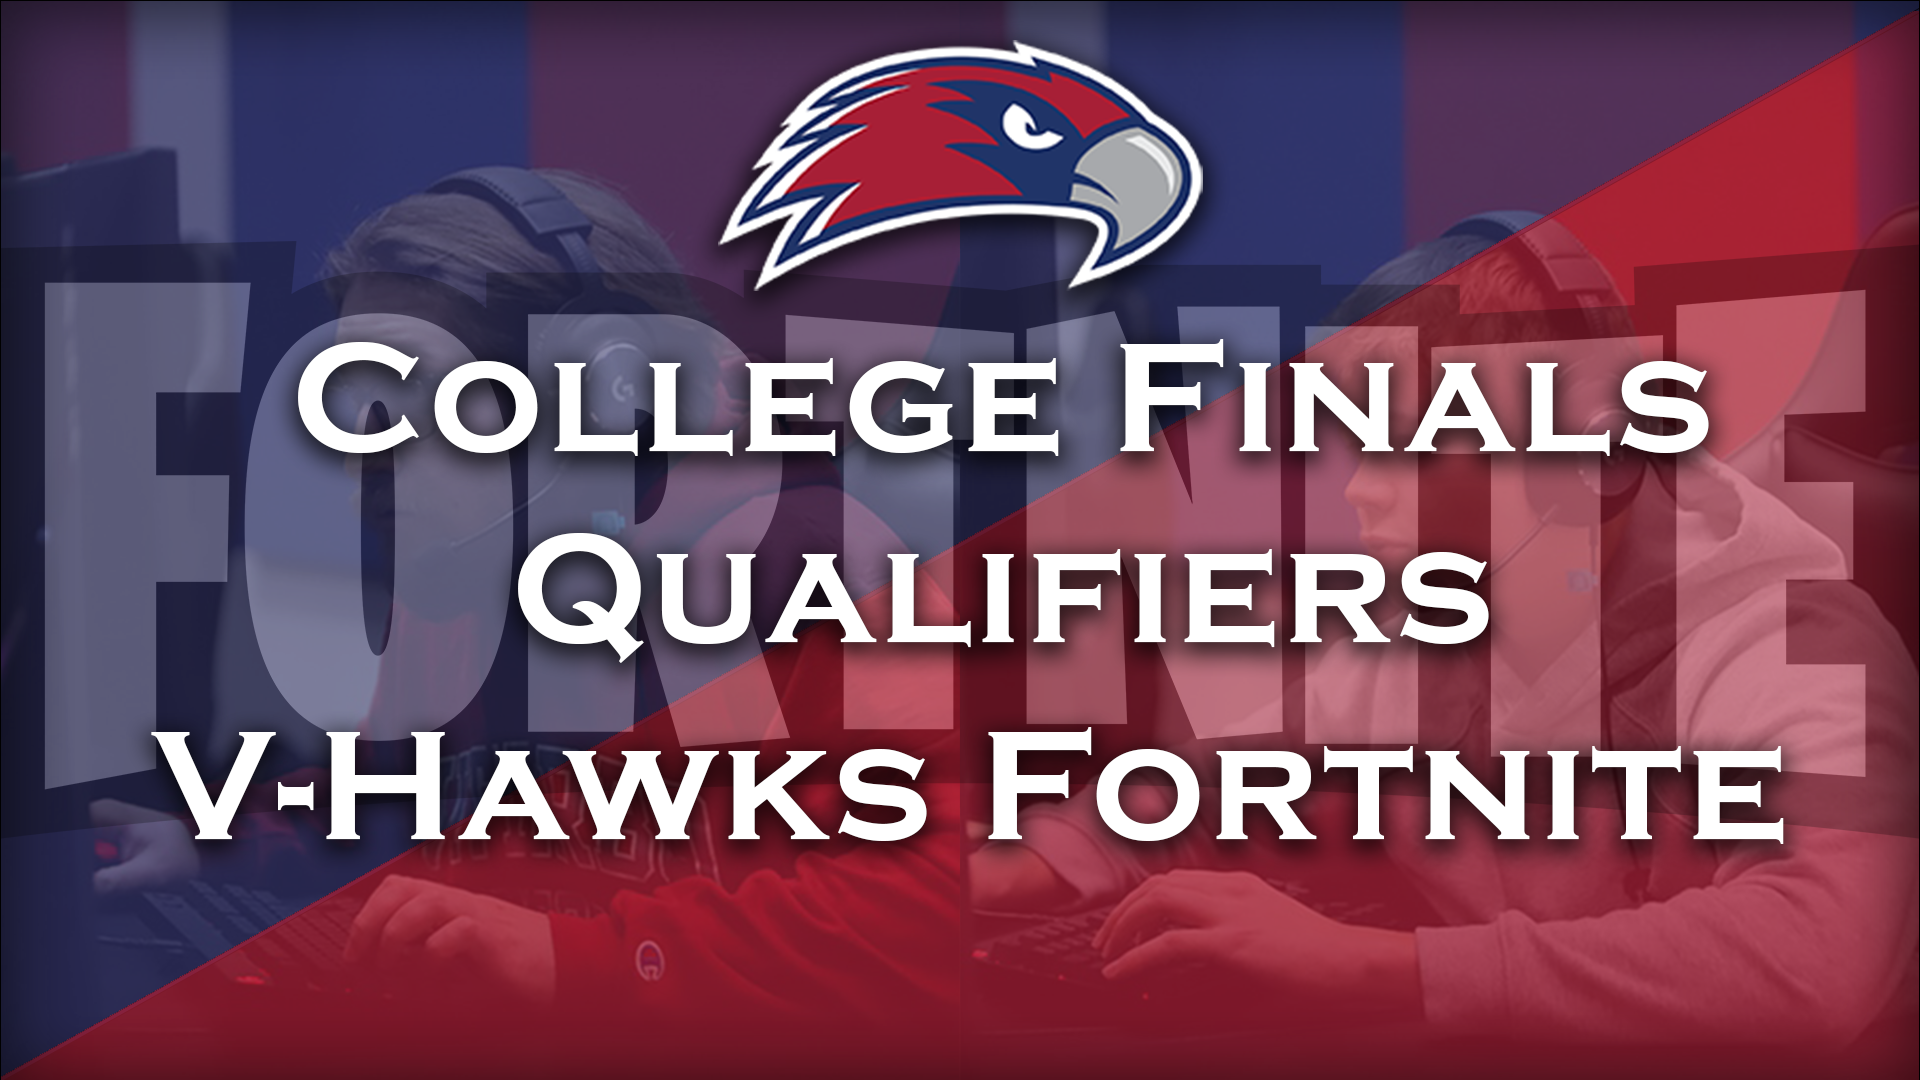 V-Hawks Fortnite Qualifies for Colleges Finals in First Competition